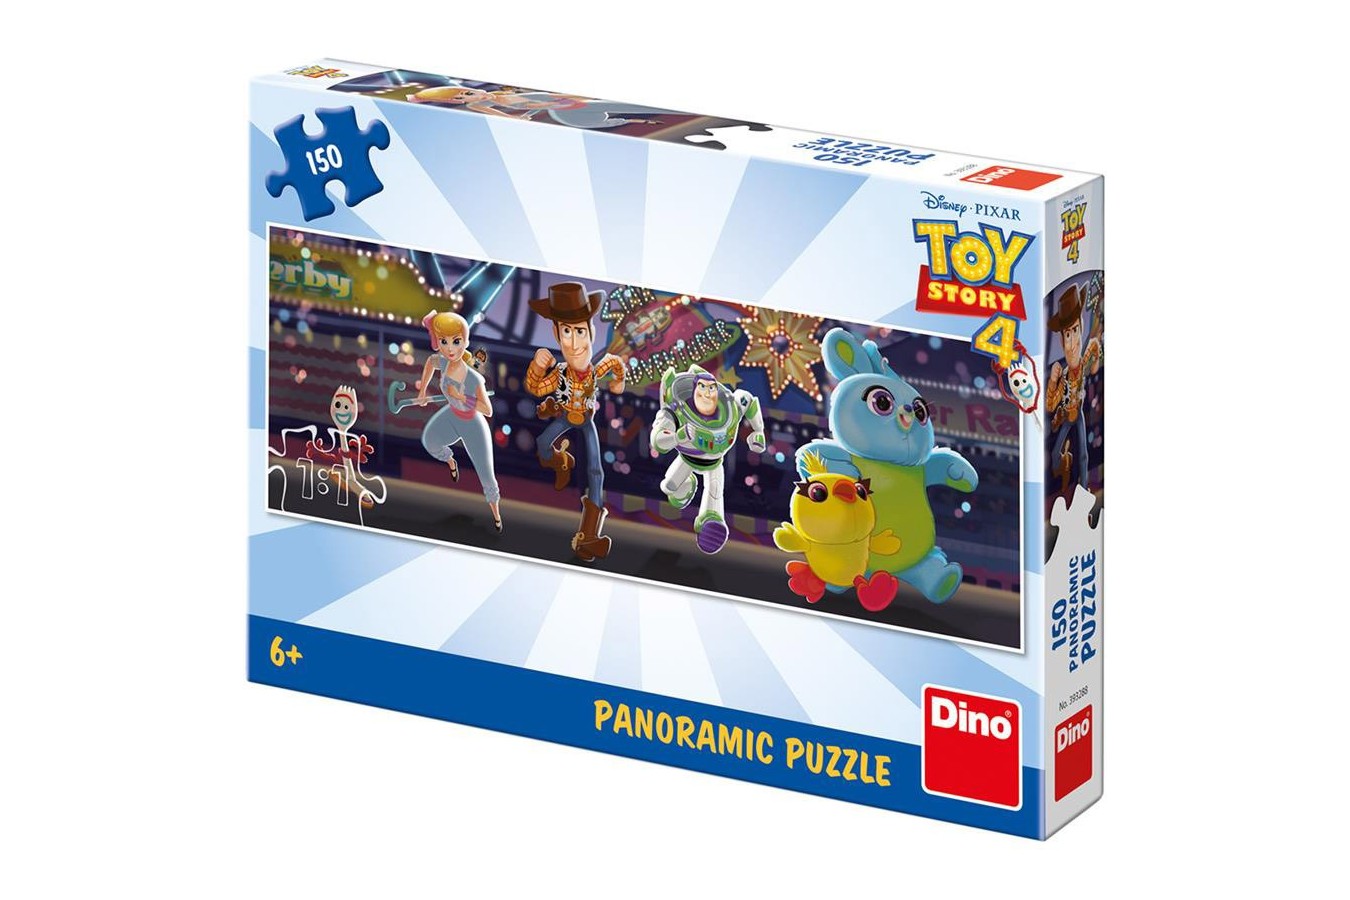 Puzzle panoramic Dino - Toy Story 4, 150 piese (39328)